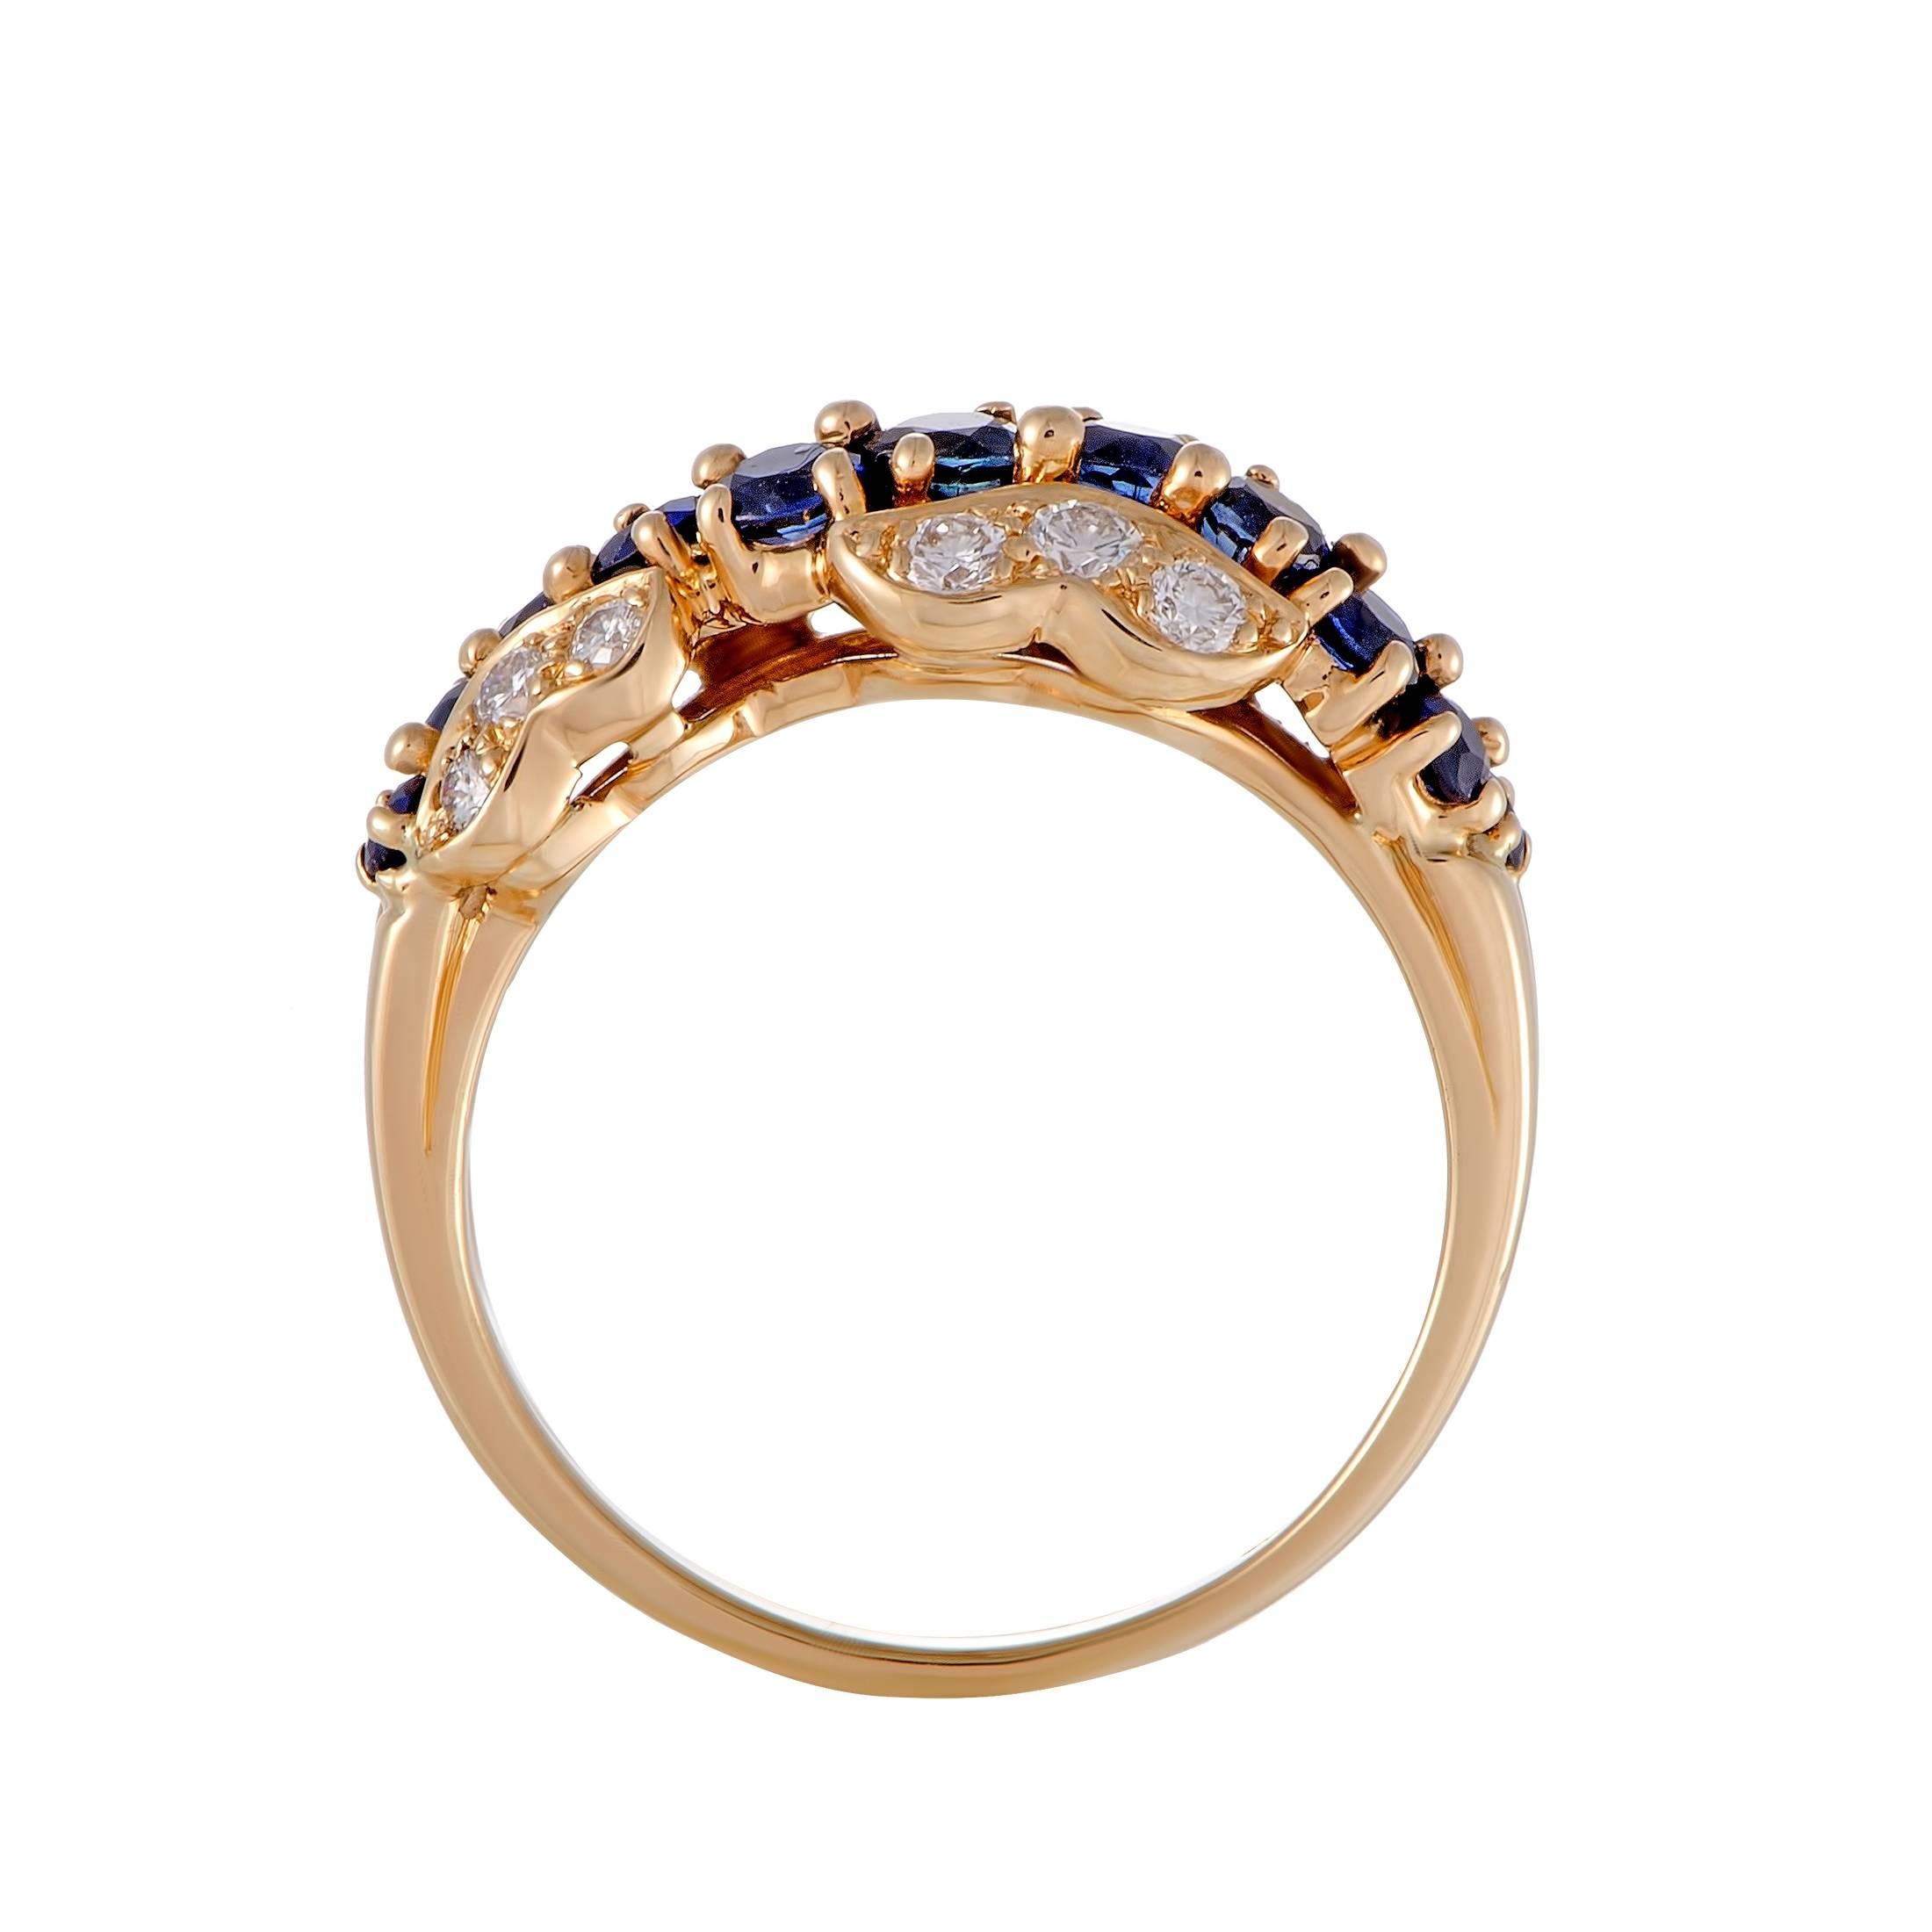 The ever-alluring prestigious combination of resplendent white diamonds and regal blue sapphires is wonderfully complemented with luxuriously radiant 18K yellow gold in this stunning ring designed by Oscar Heyman. The sapphires total 0.50 carats and